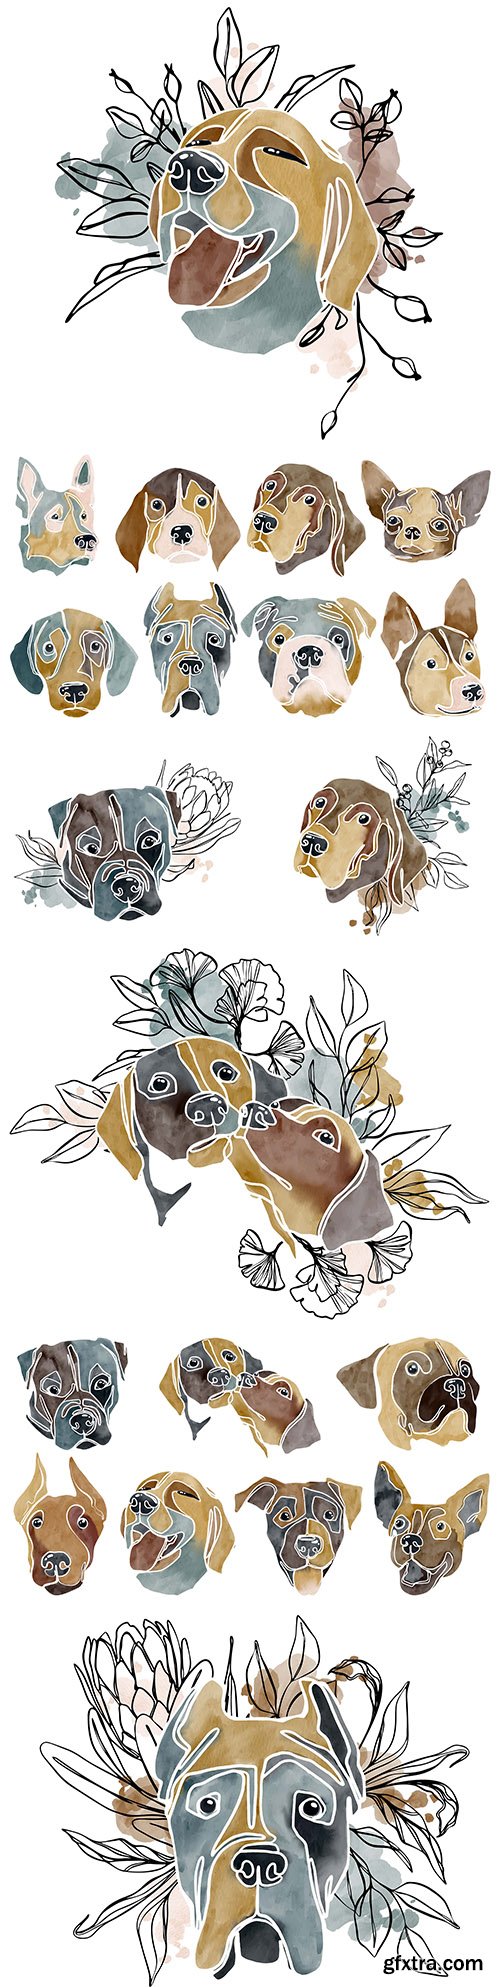 Dogs of different breeds abstract illustrations